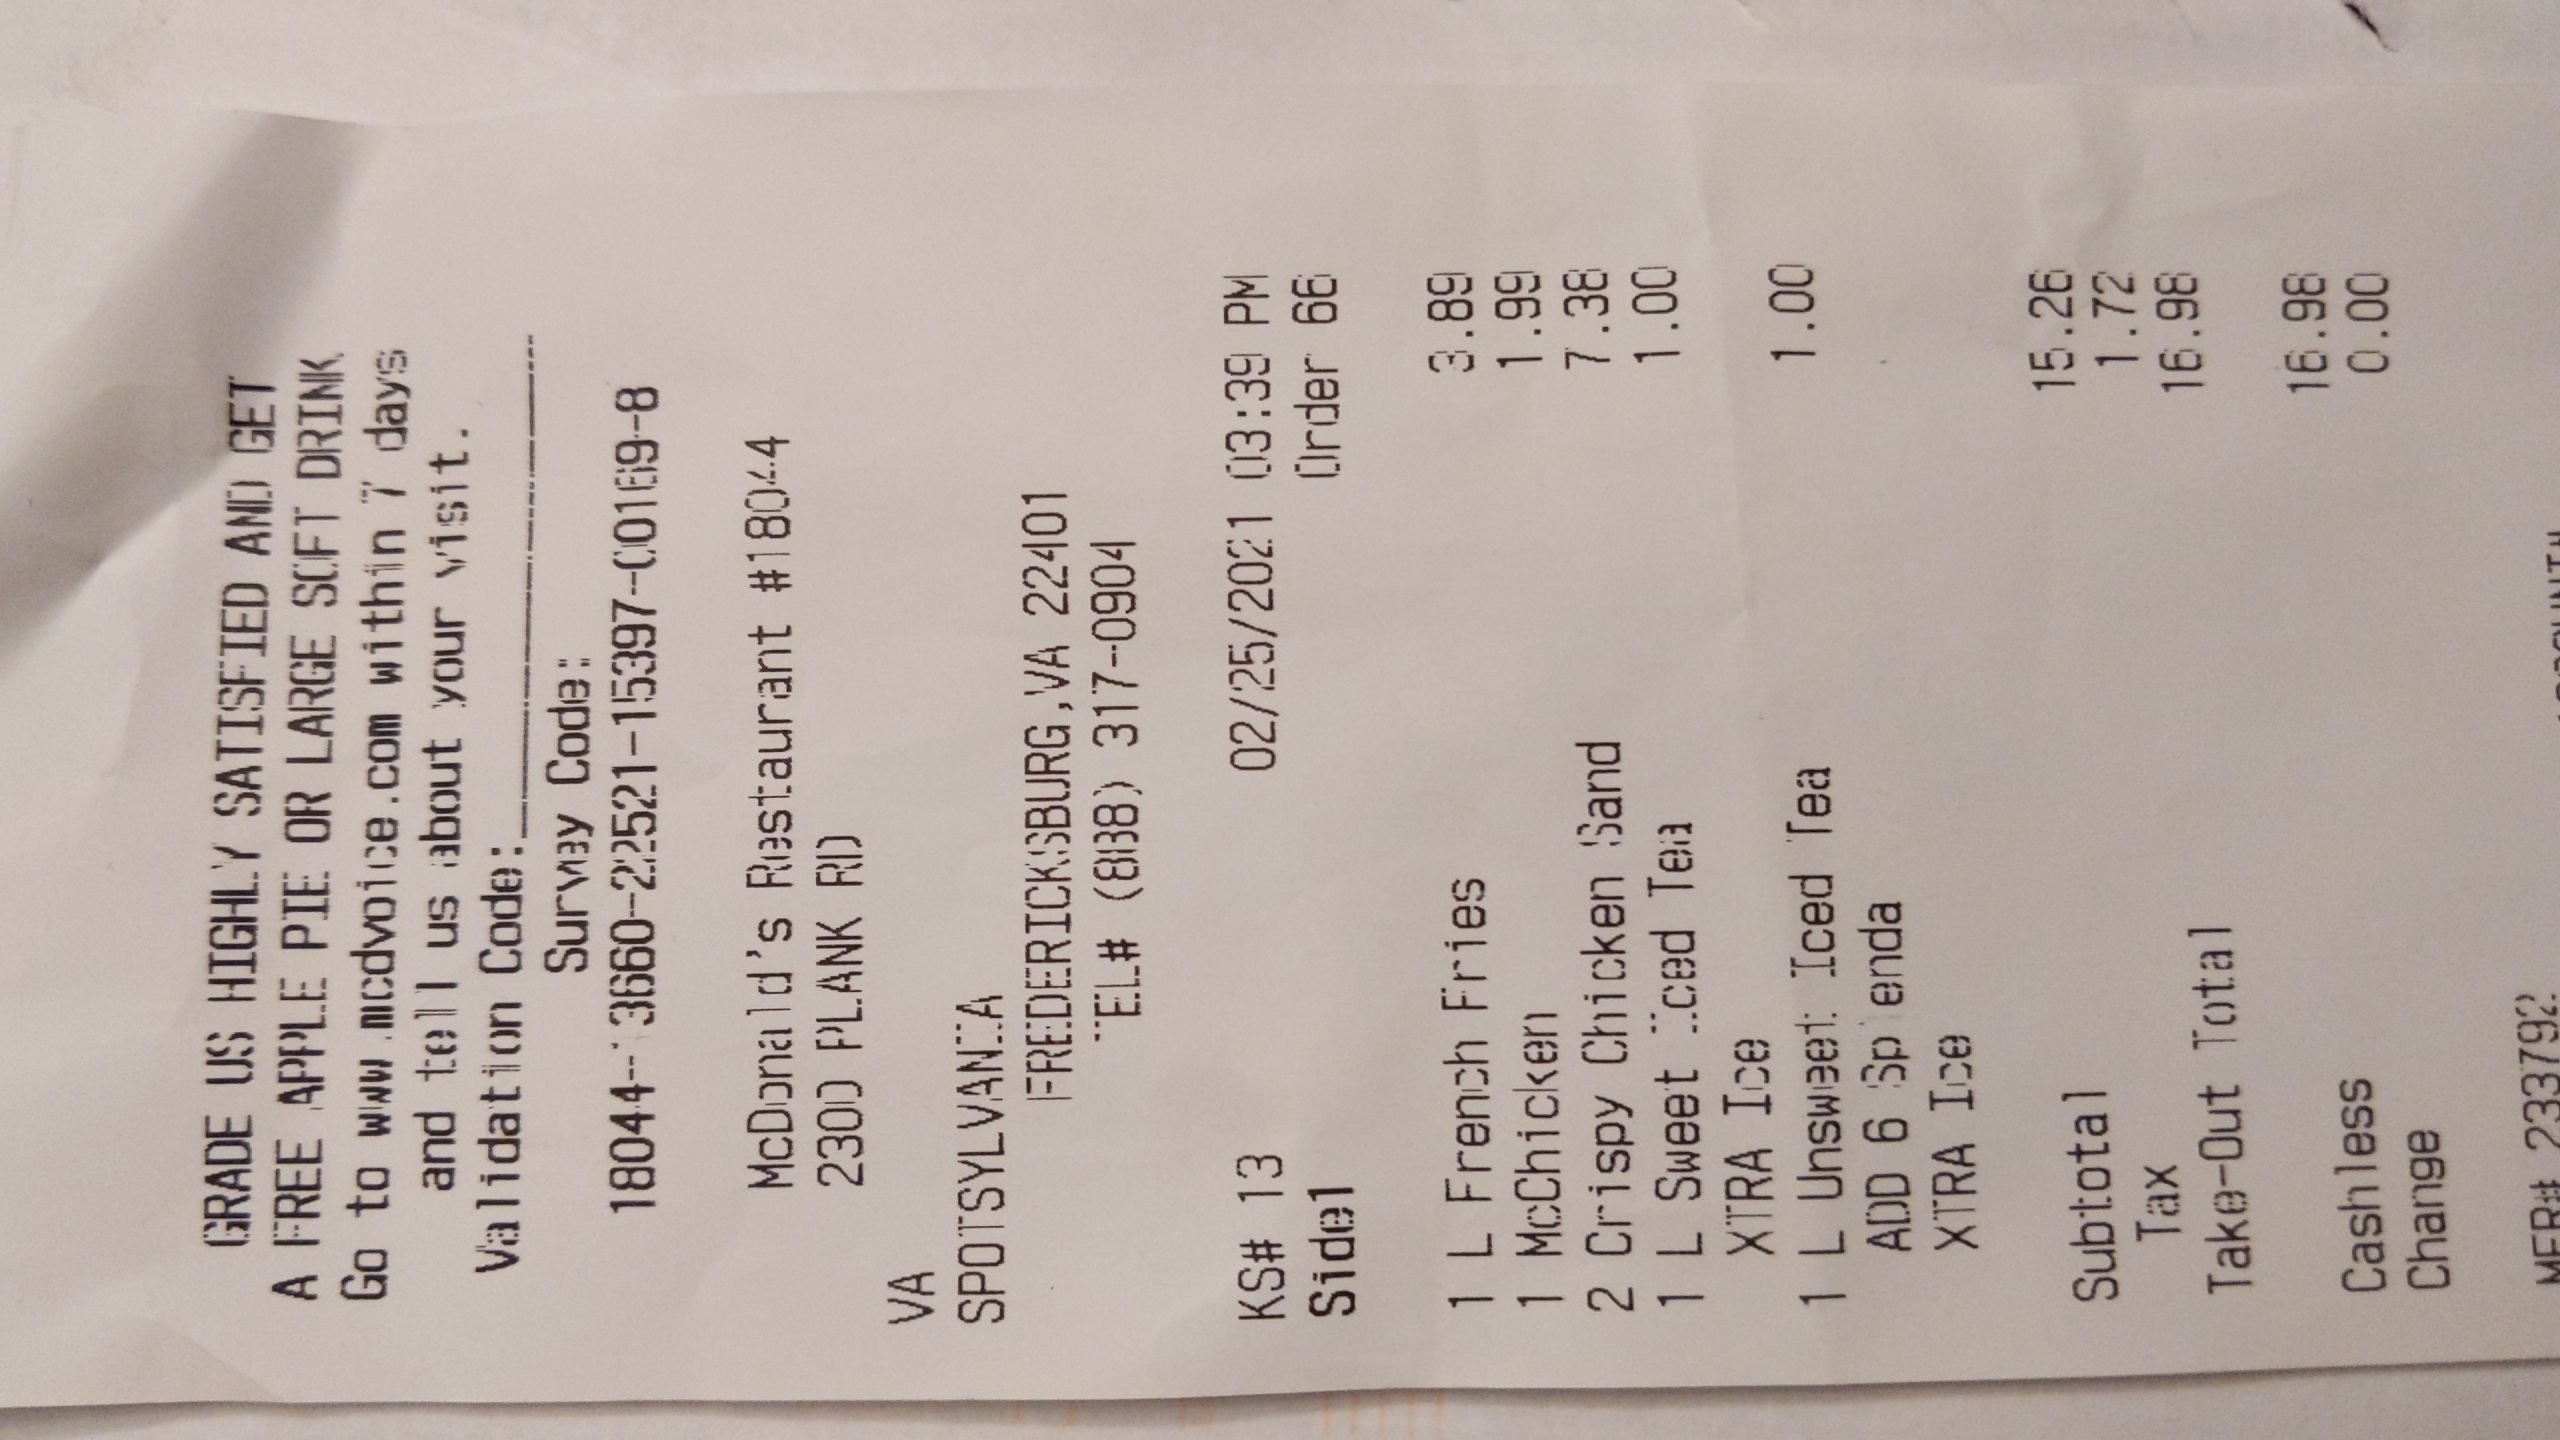 McDonalds complaint Over priced large fry